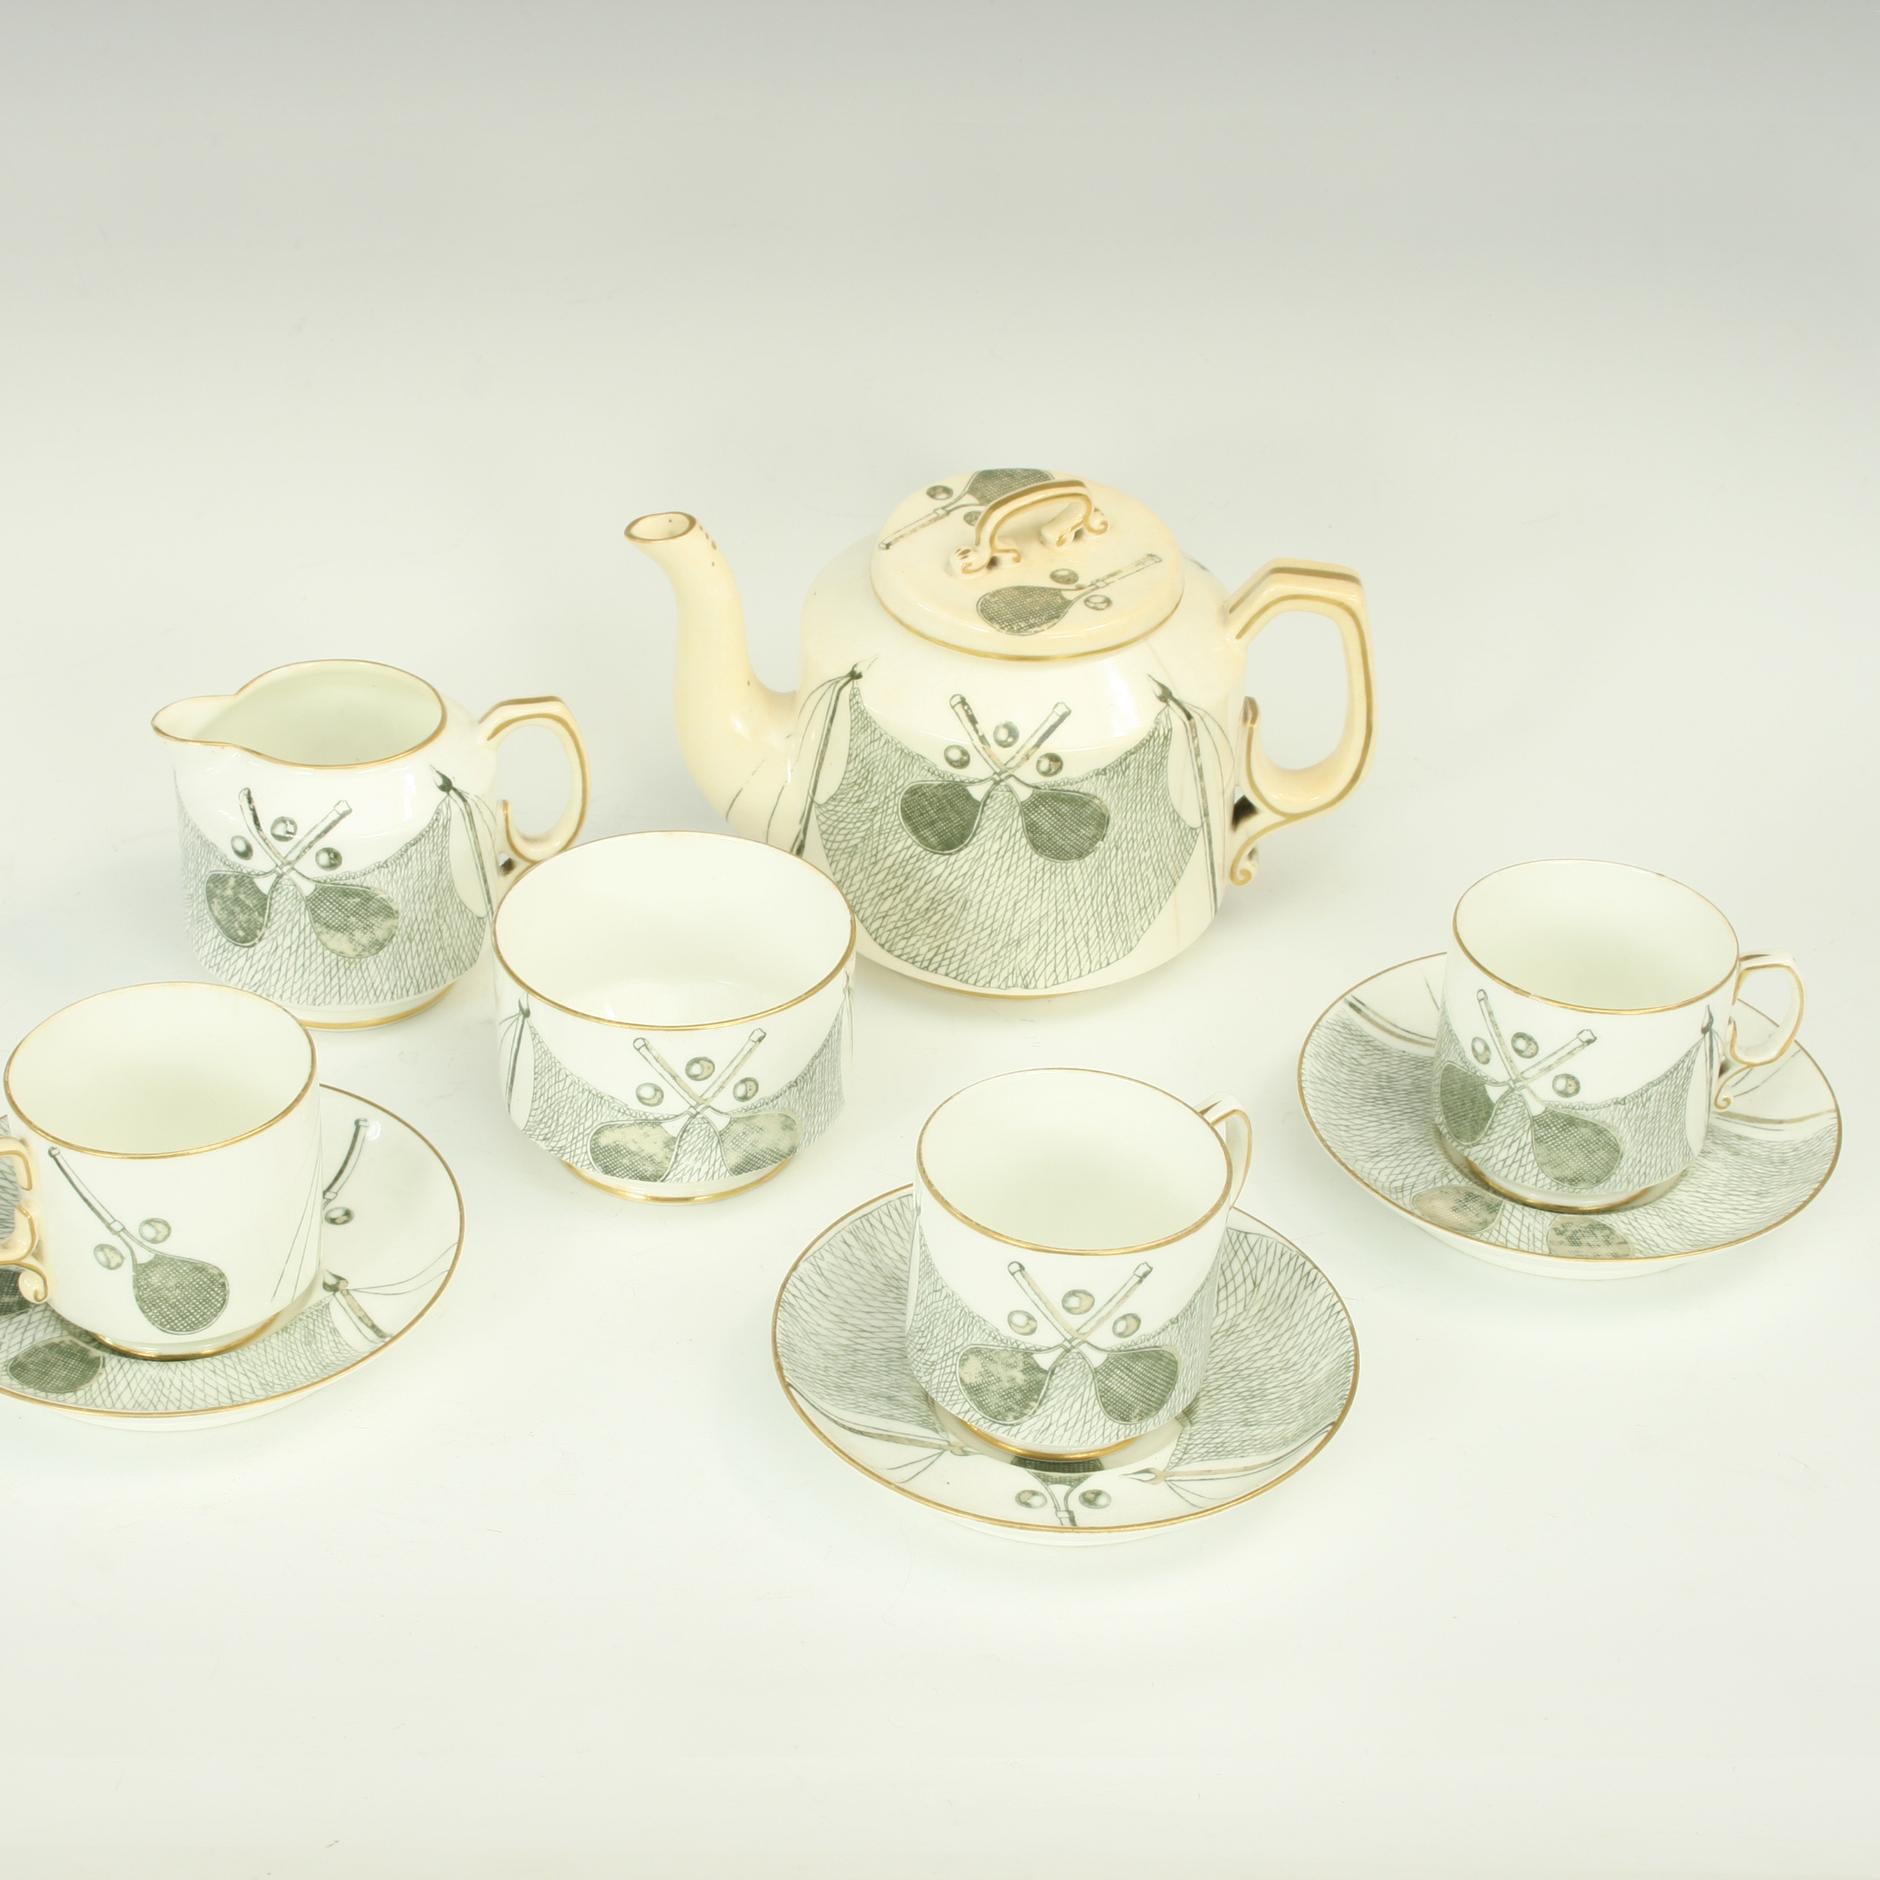 This is a very rare China tennis tea set by George Jones & Sons. The set comprises of a tea pot, three cups with saucers, a sugar bowl and a milk jug. Each item has a gilt rim with tennis rackets, balls and net on them. The sugar bowl has a slight